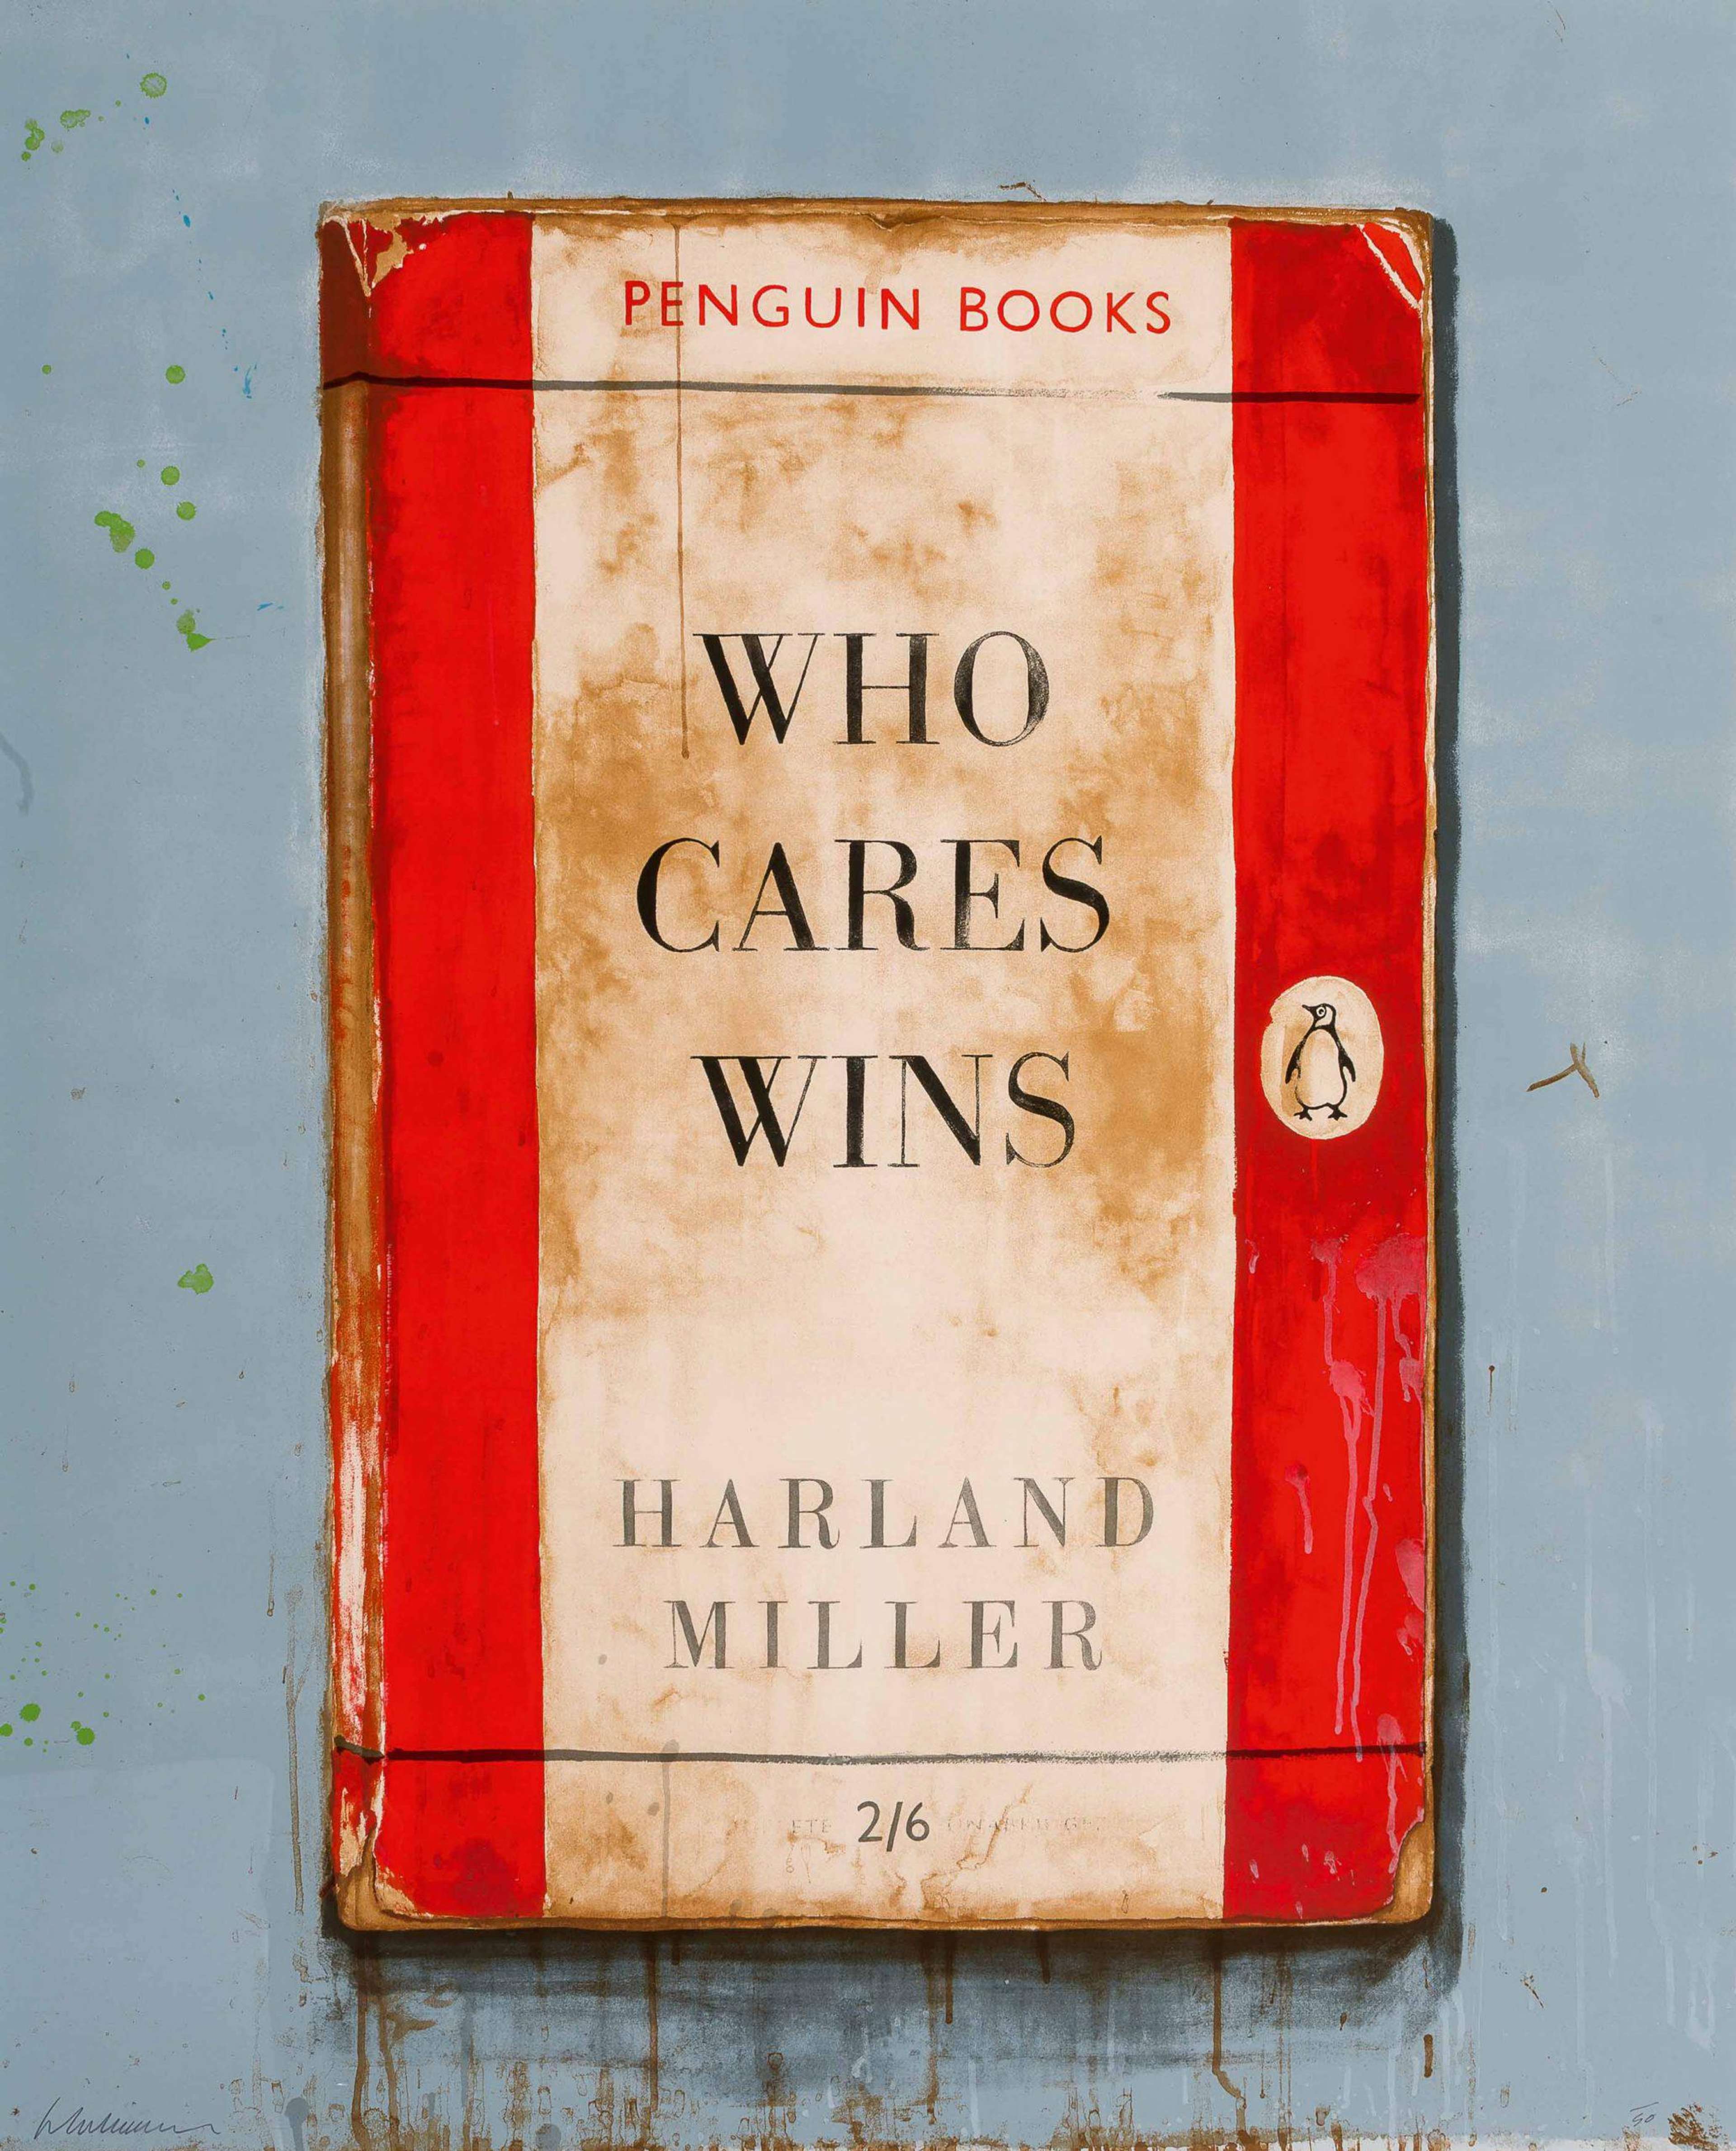 The screen print depicts a vintage Penguin book cover at the centre of the composition. Against a steel-coloured background, the red and white book appears worn, with water stains which seep from the bottom of the book into the bottom of the composition. On the book cover is the title: ‘WHO CARES WINS’, with ‘PENGUIN BOOKS’ written in the top margin, and the artist's name ‘HARLAND MILLER’ in the bottom margin.